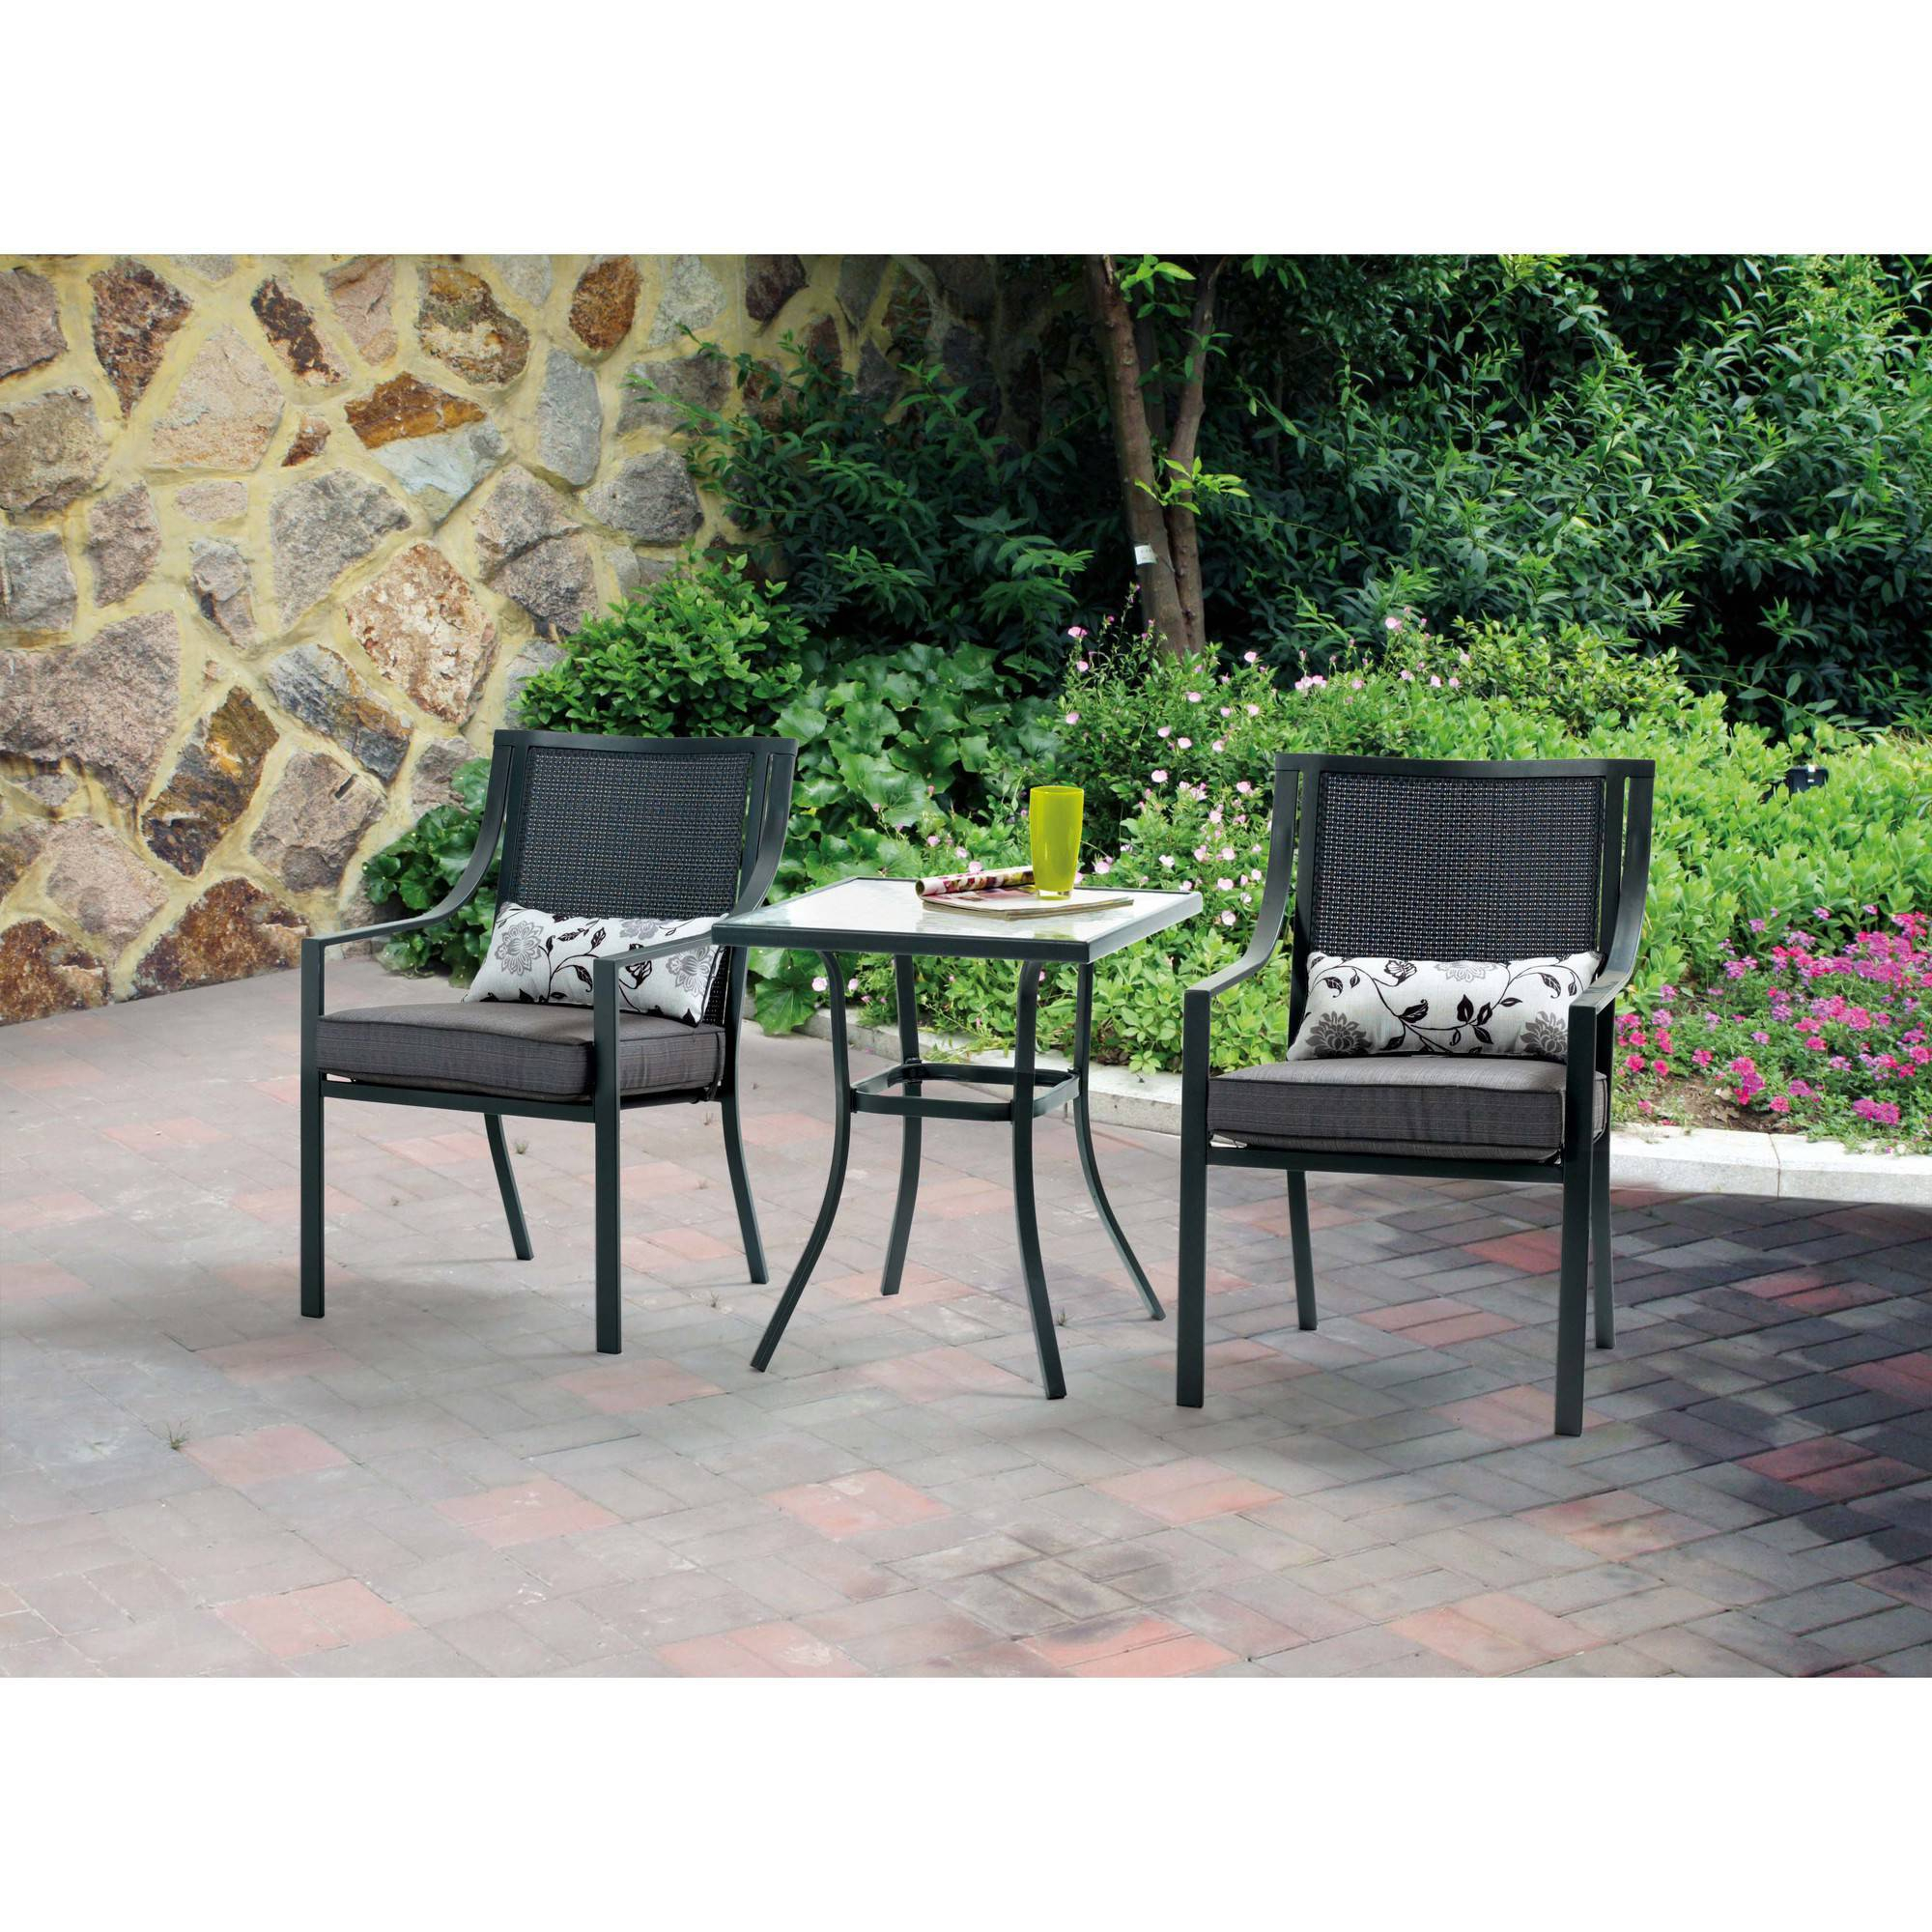 Patio High Dining Sets Patio Furniture Table Tops For intended for dimensions 2000 X 2000